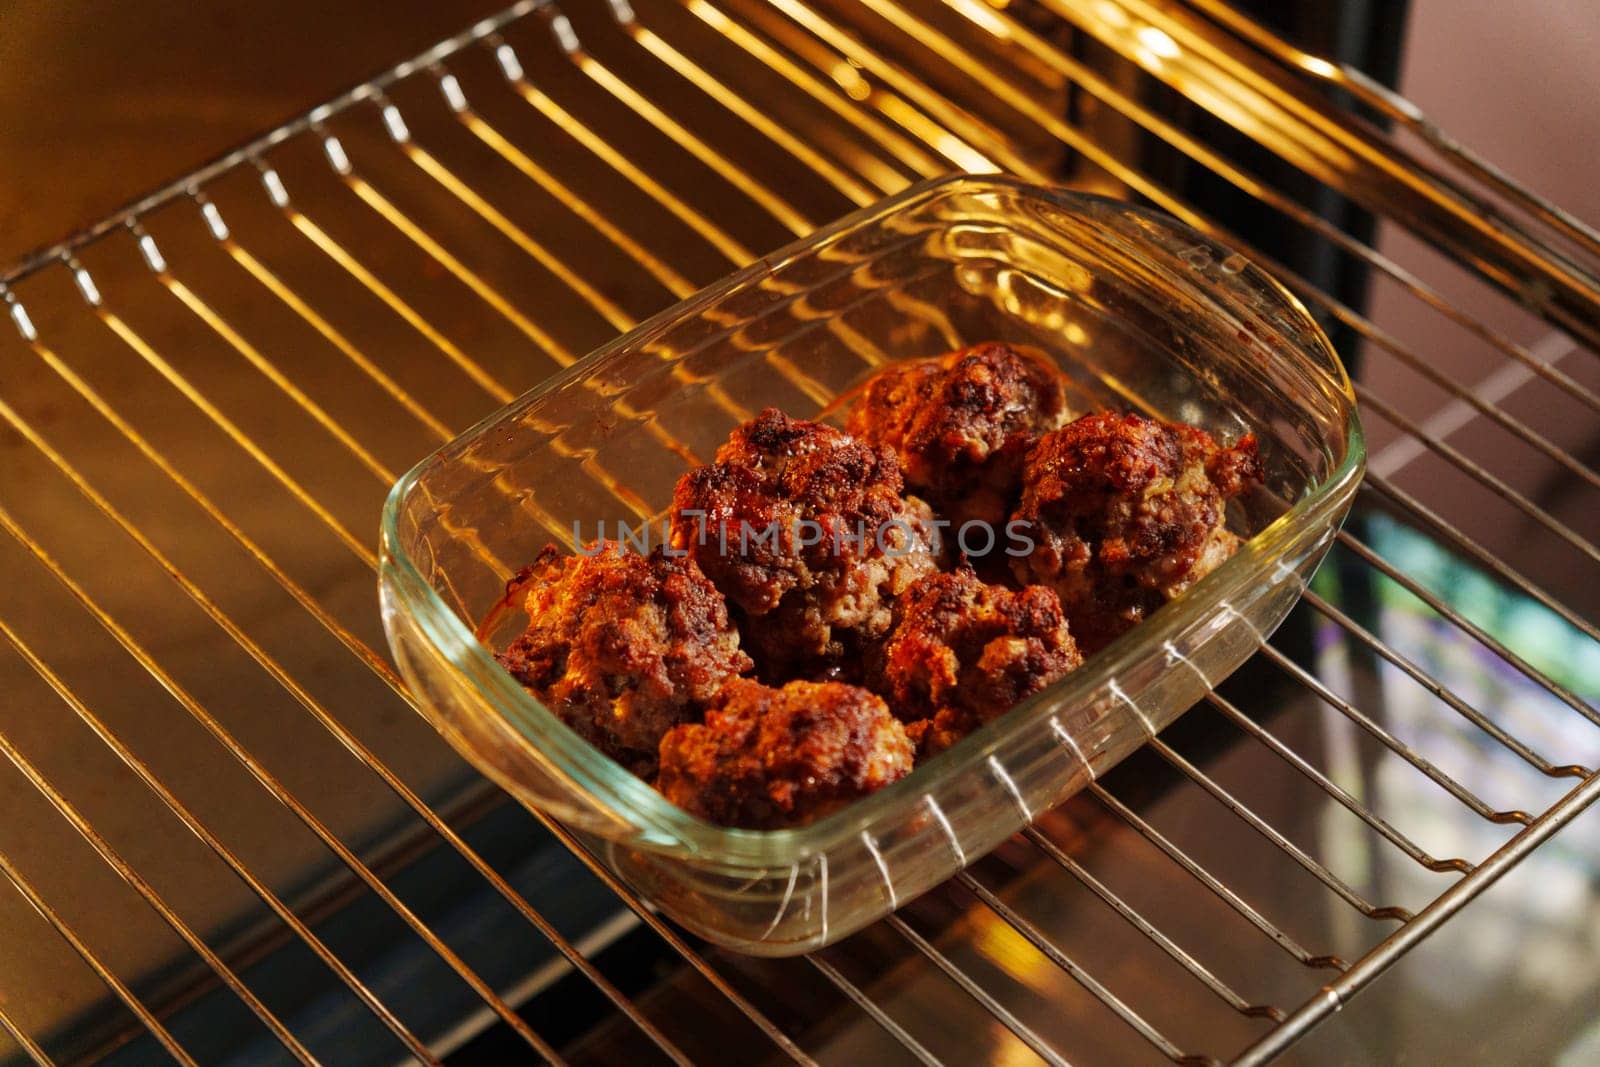 Meatballs with a succulent and crispy exterior rest in a glass baking dish, embodying the warmth of a home-cooked meal. by darksoul72